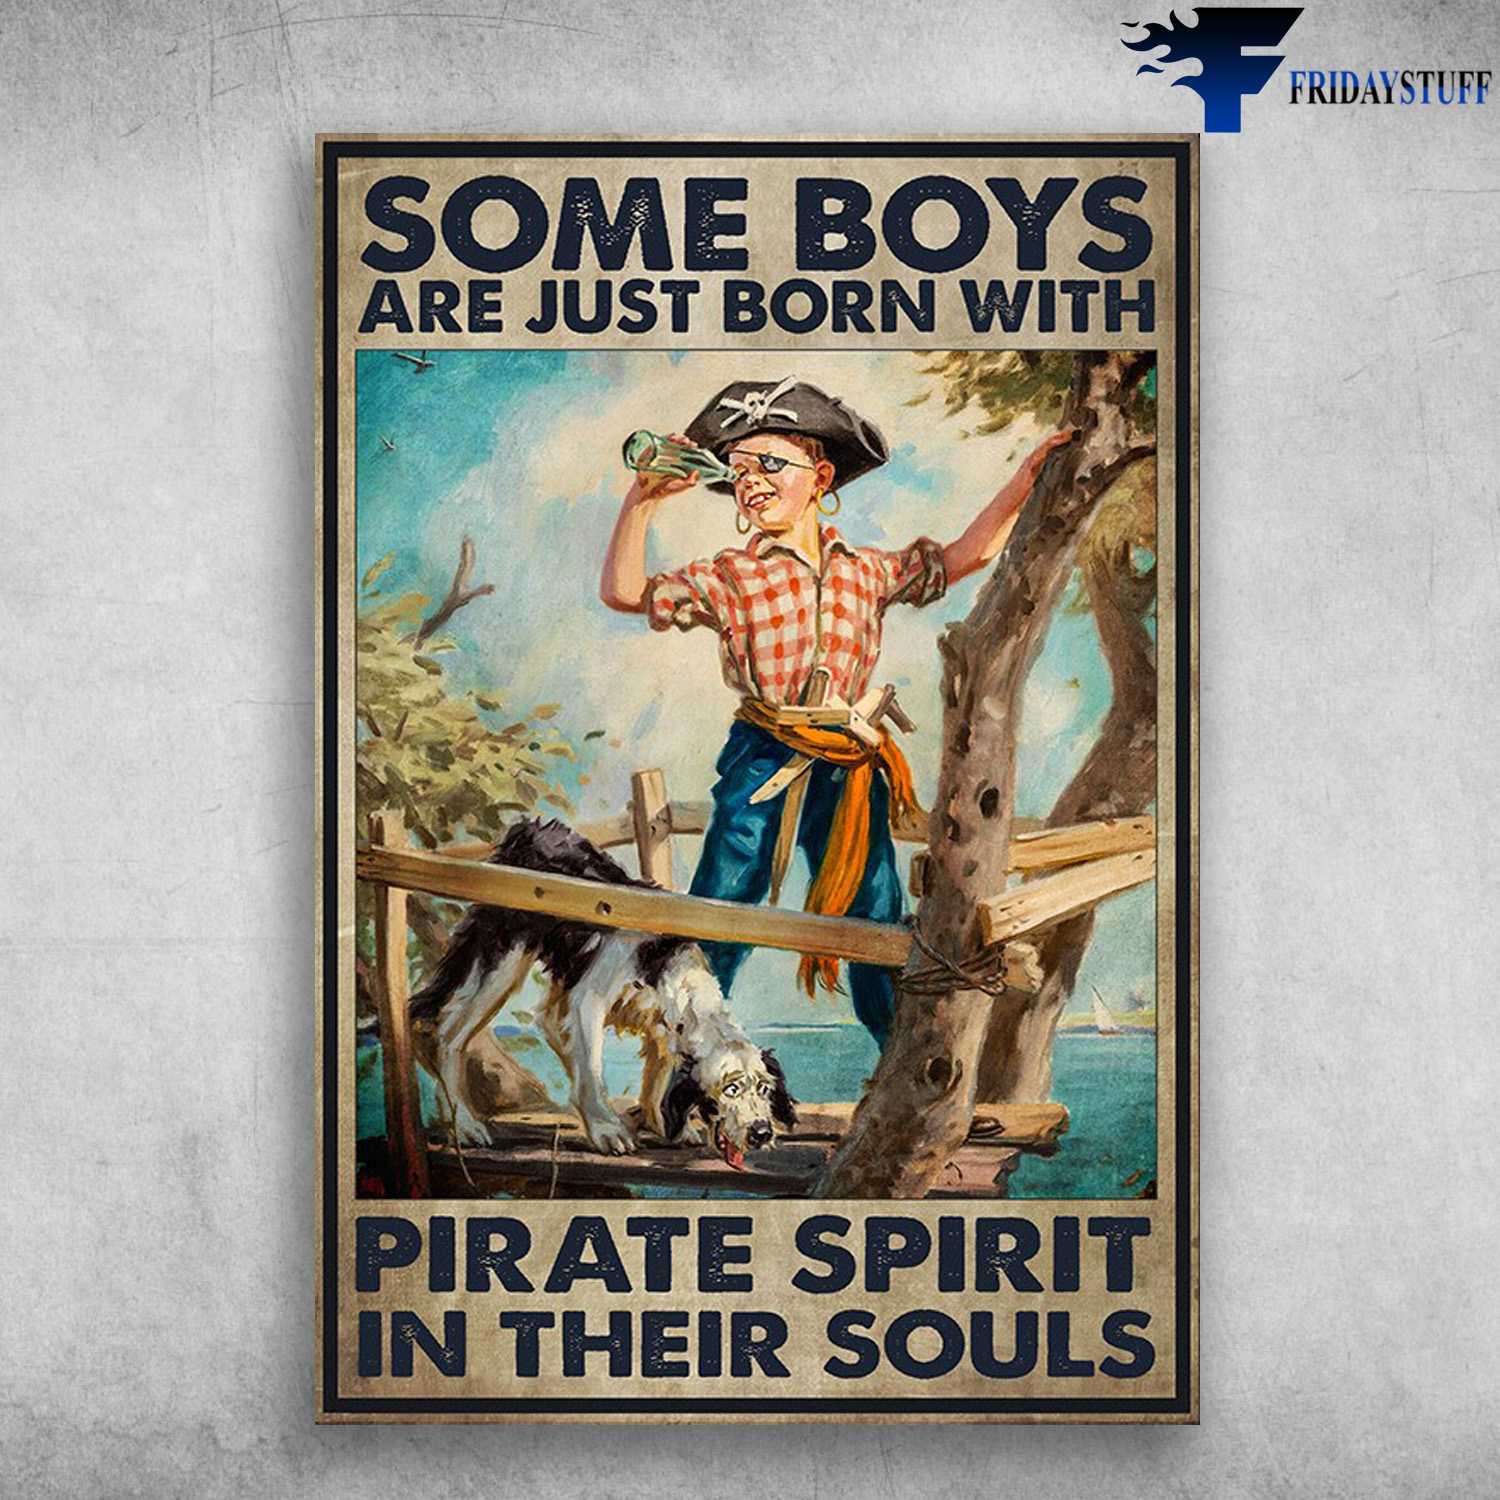 Pirate Boy, Dog Lover - Some Boys Are Just Born With, Pirate Spirit In Their Souls